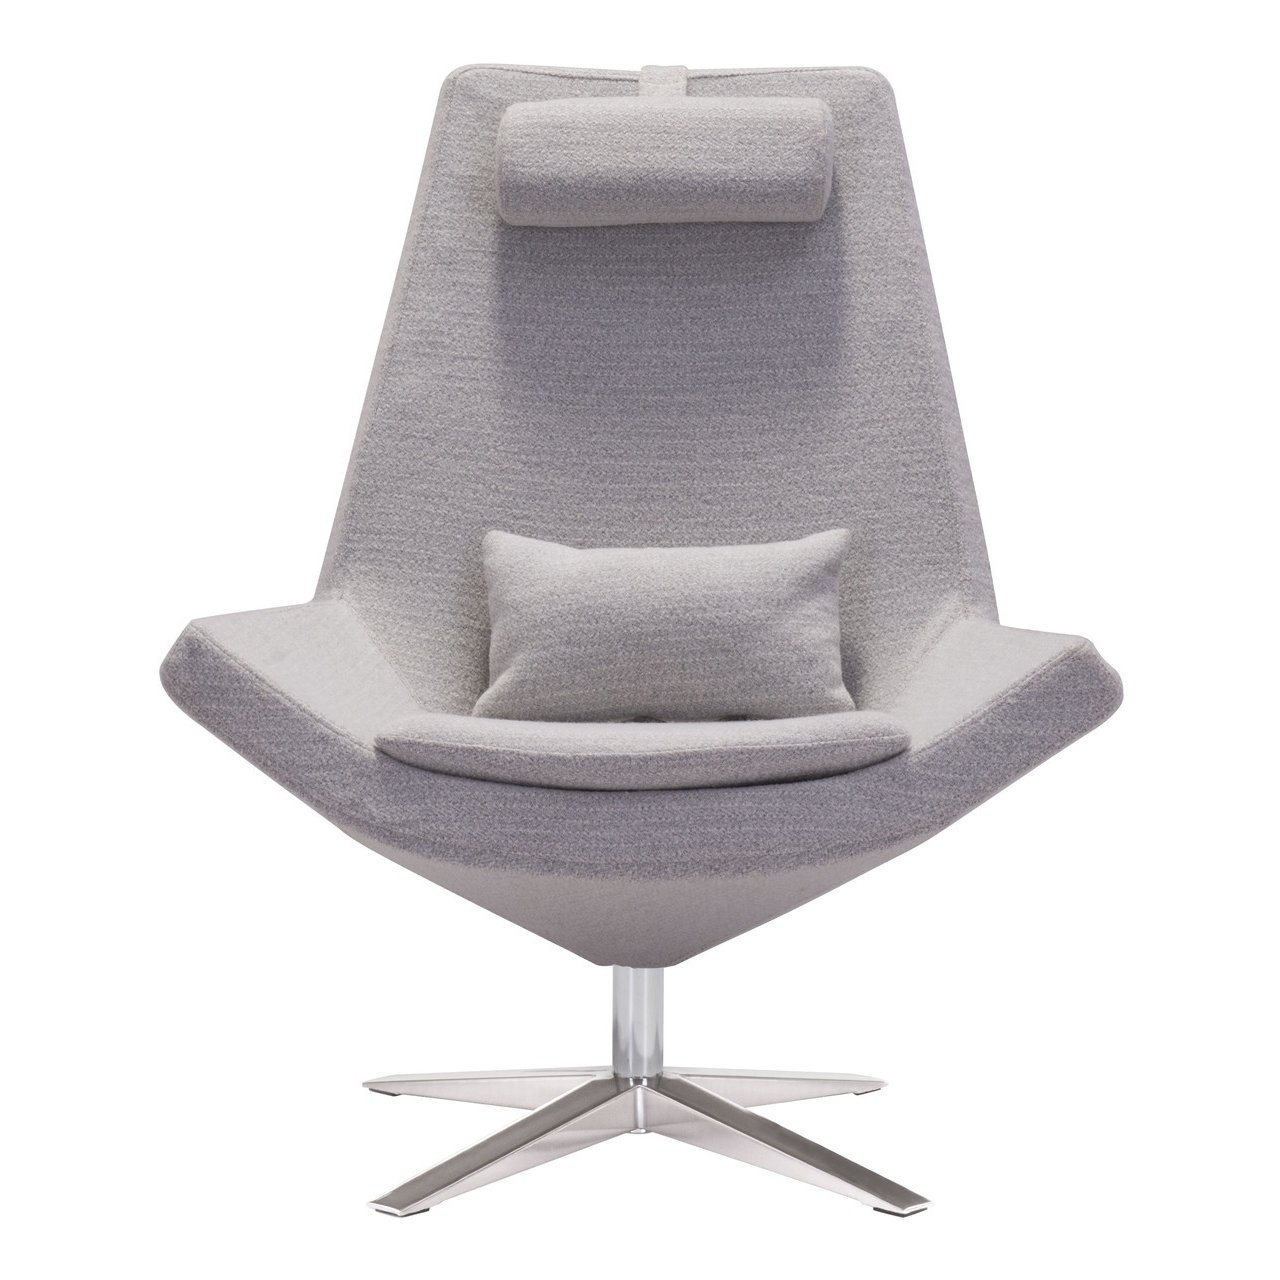 bruges occasional chair - light gray